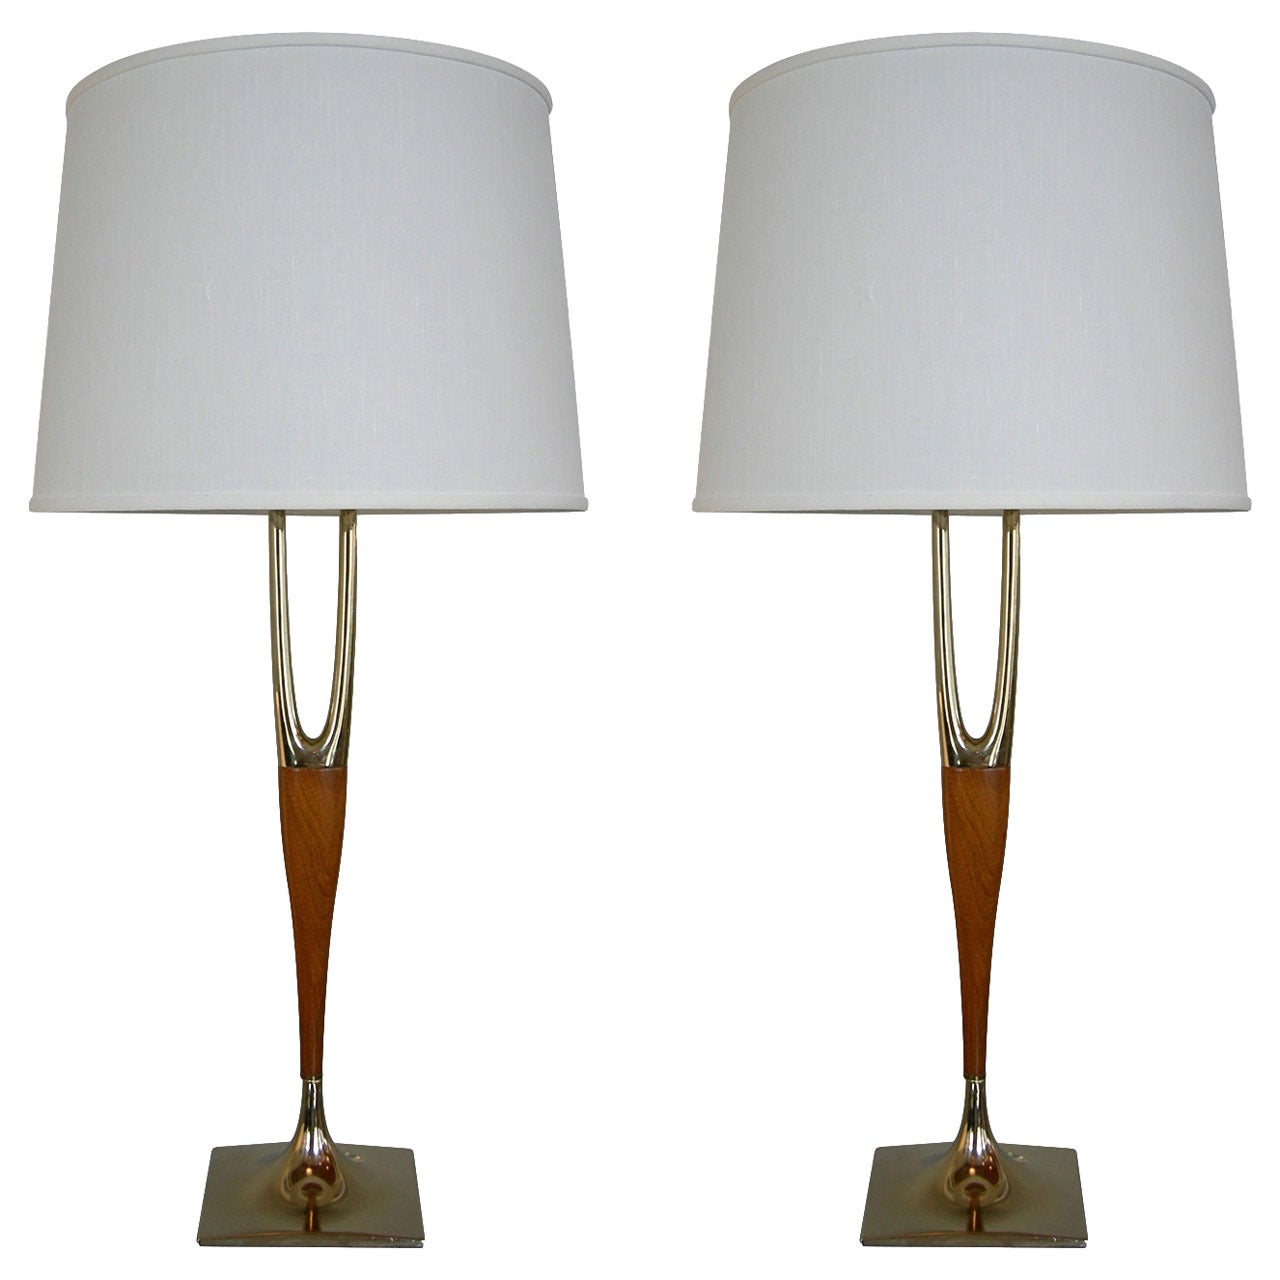 Wishbone Table Lamps by Laurel Co.